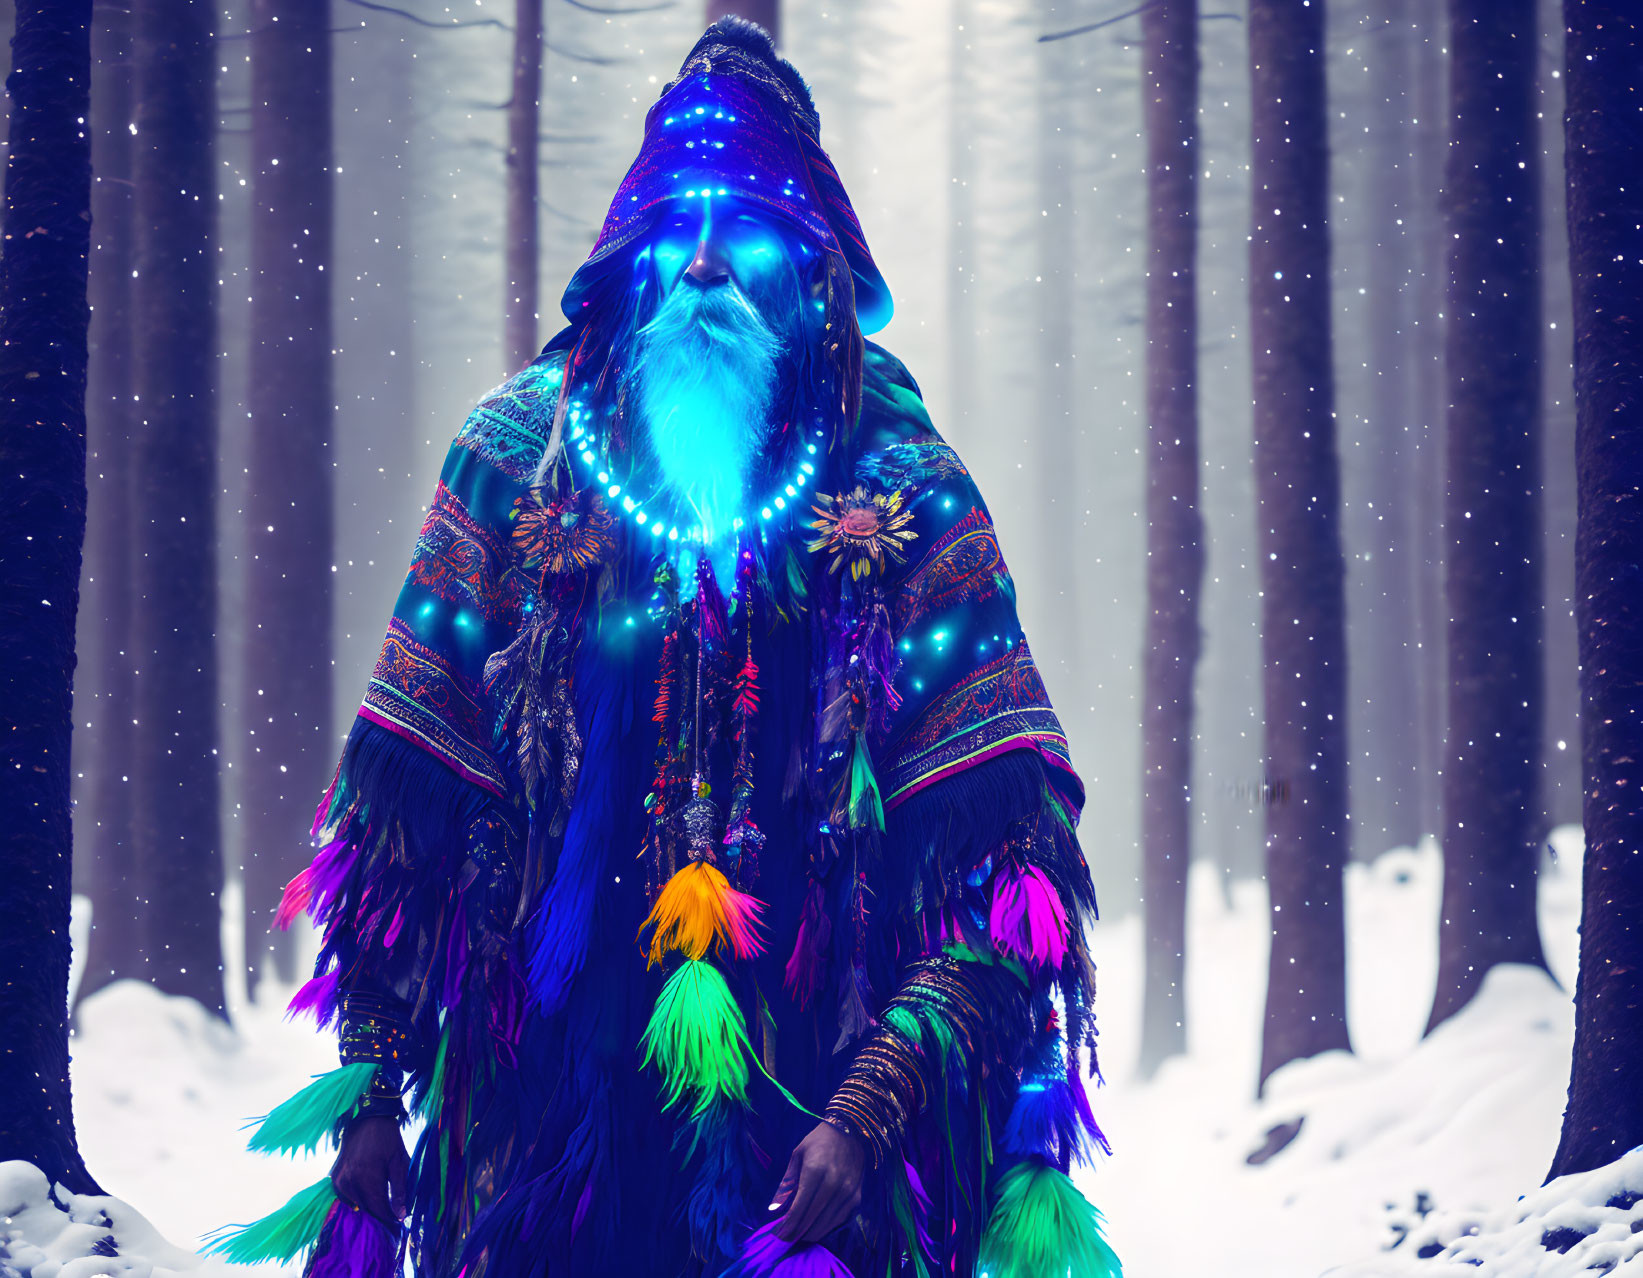 Vibrant ethnic attire in snowy forest with neon lights